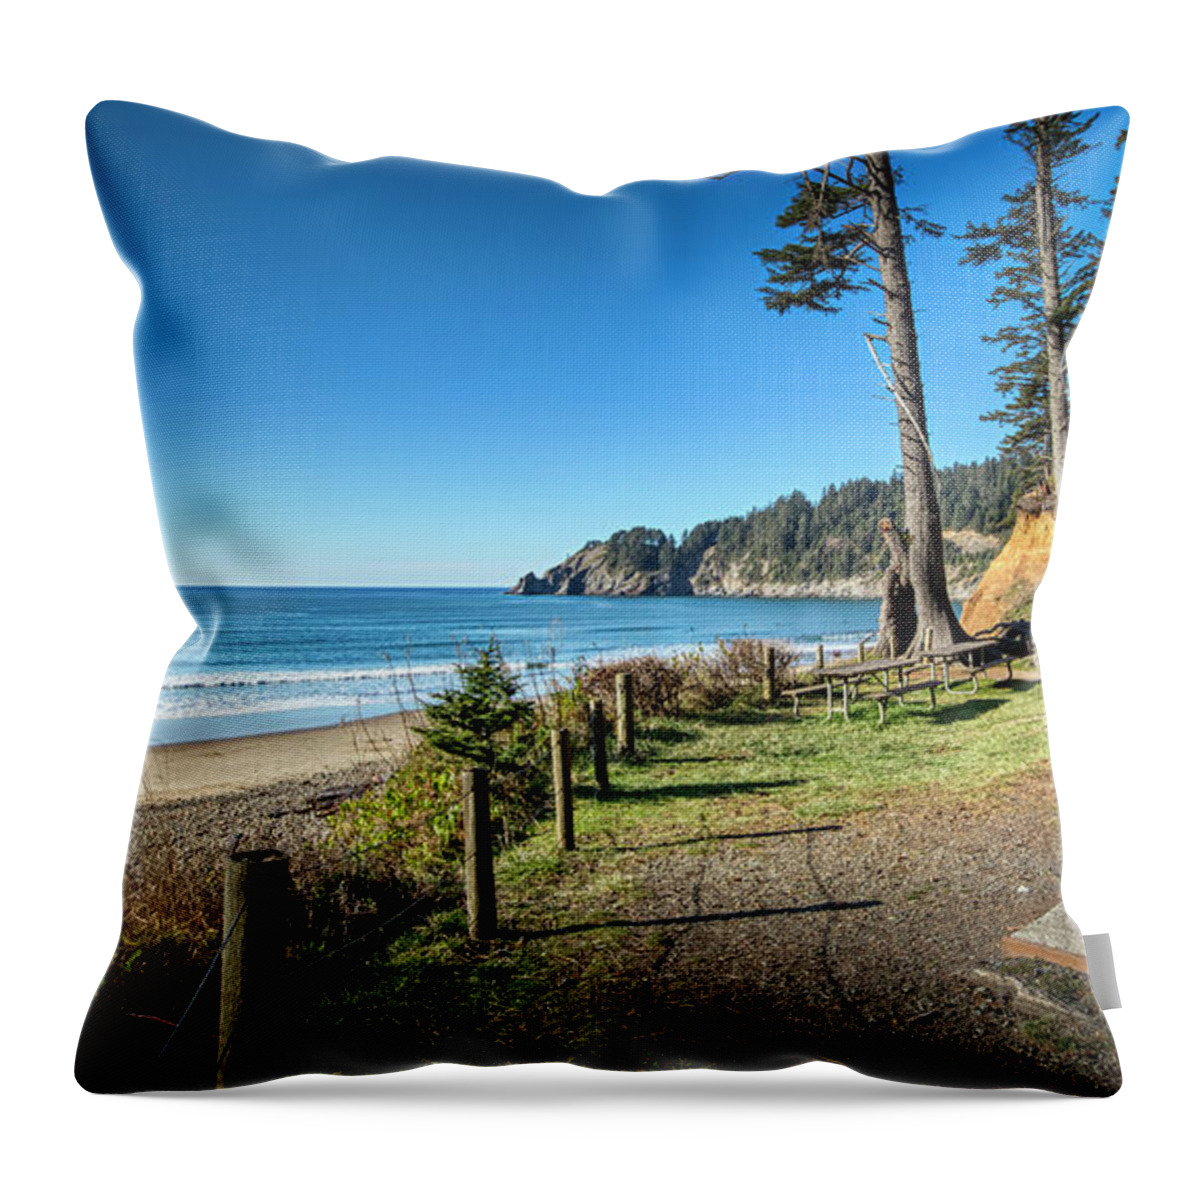 Short Sands Beach Oswald West State Park Oregon Coast Throw Pillow featuring the photograph Short Sands Beach Oswald West State Park Oregon Coast by Dustin K Ryan